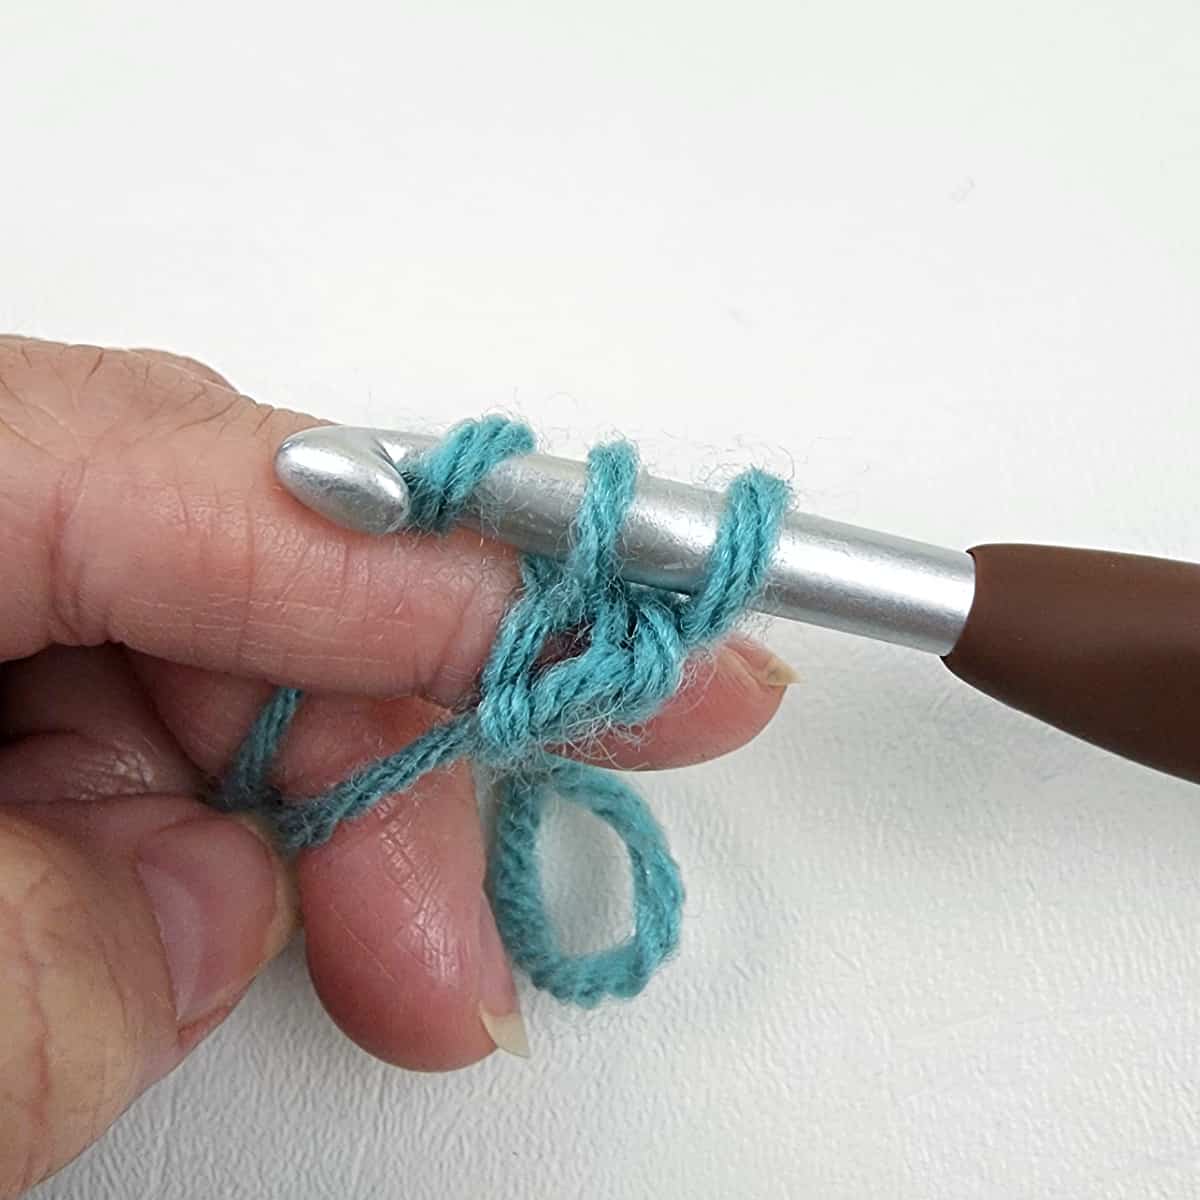 How to being a mini bean stitch.